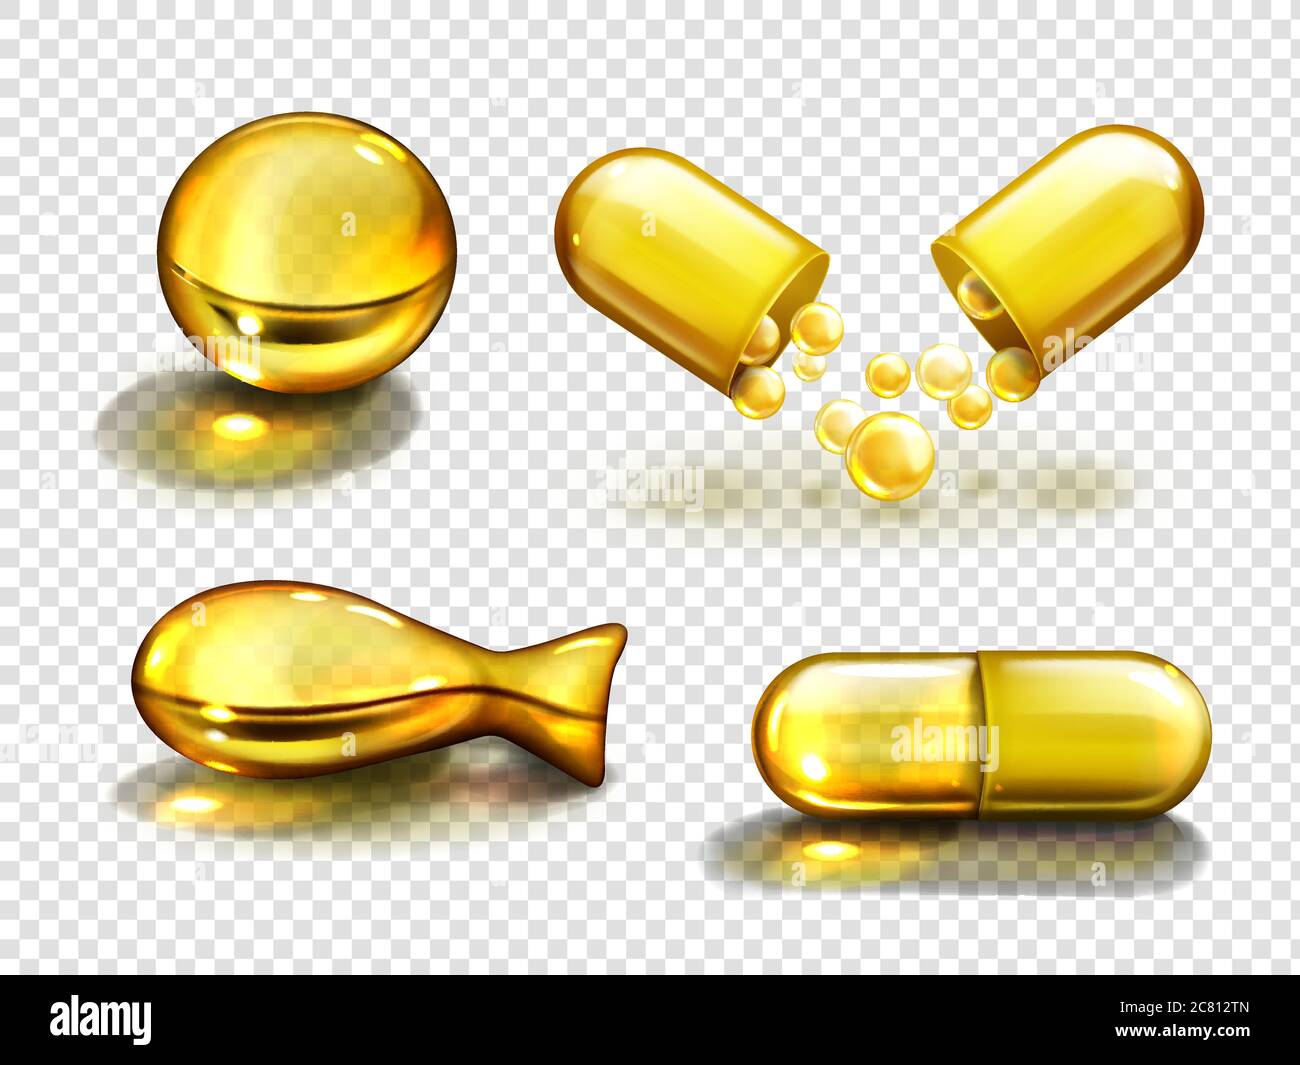 Gold oil capsules, vitamine, bio supplements, fish, round and oval shape pills. Cosmetics, omega 3 golden bubbles, antibiotic gel, isolated serum droplets or collagen essence, realistic 3d vector set Stock Vector